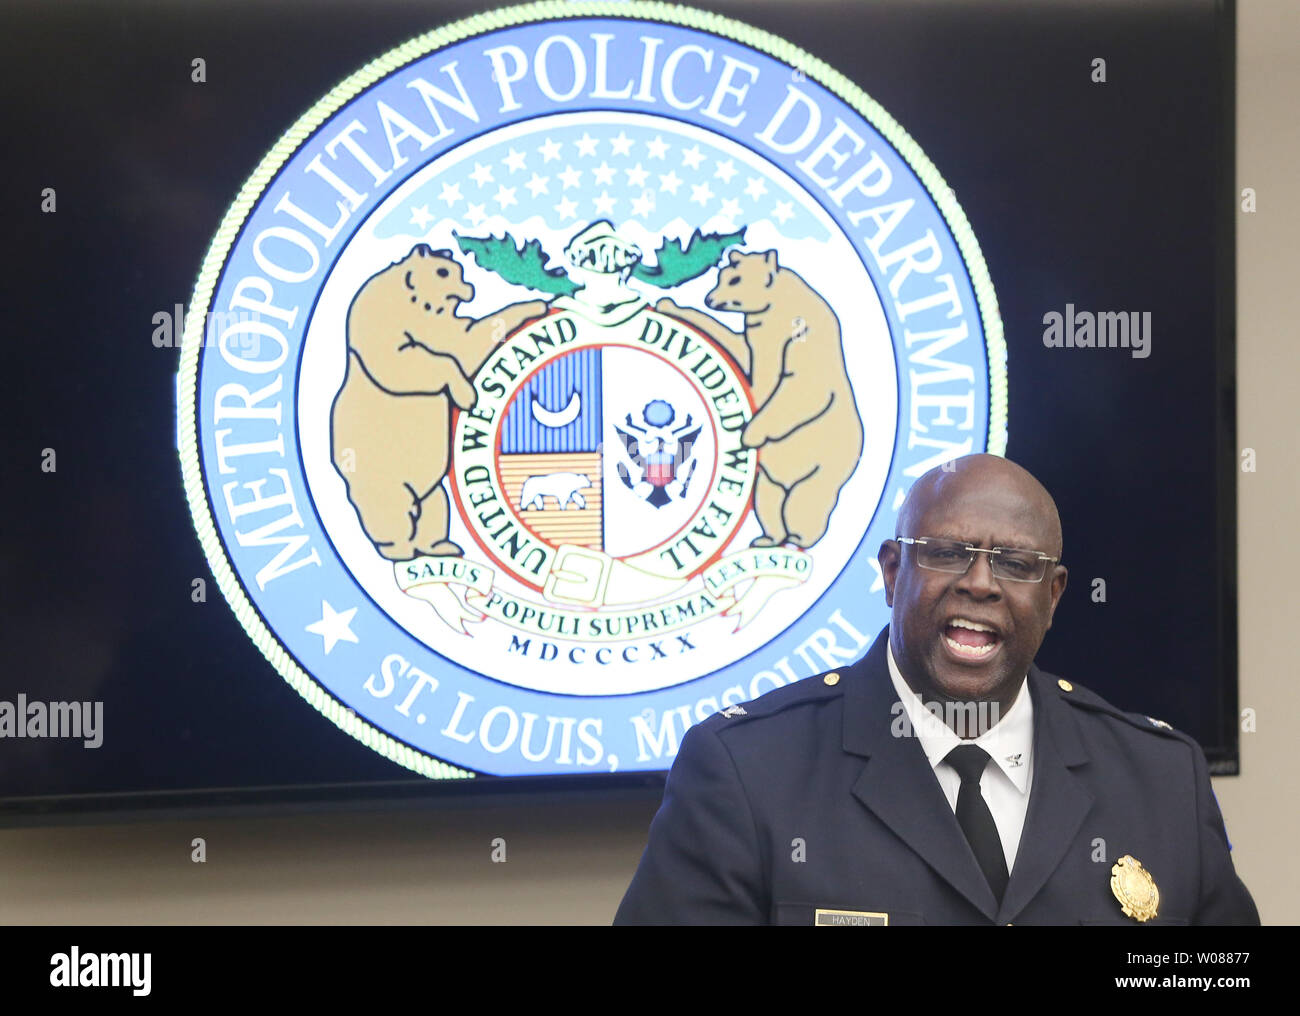 An angry St. Louis Metropolitian Police Chief John Hayden remarks about the shooting death of officer Katlyn Alix during a press conference in St. Louis on January 31, 2019. St. Louis Circuit Attorney Kim Gardner has brought multiple concerns to the media on how the department handled the initial investigation. Hayden said he called the press conference to clarify as much as he can surrounding the tragic incident which occured on January 24, 2019, by a fellow St. Louis Police officer. Photo by Bill Greenblatt/UPI Stock Photo